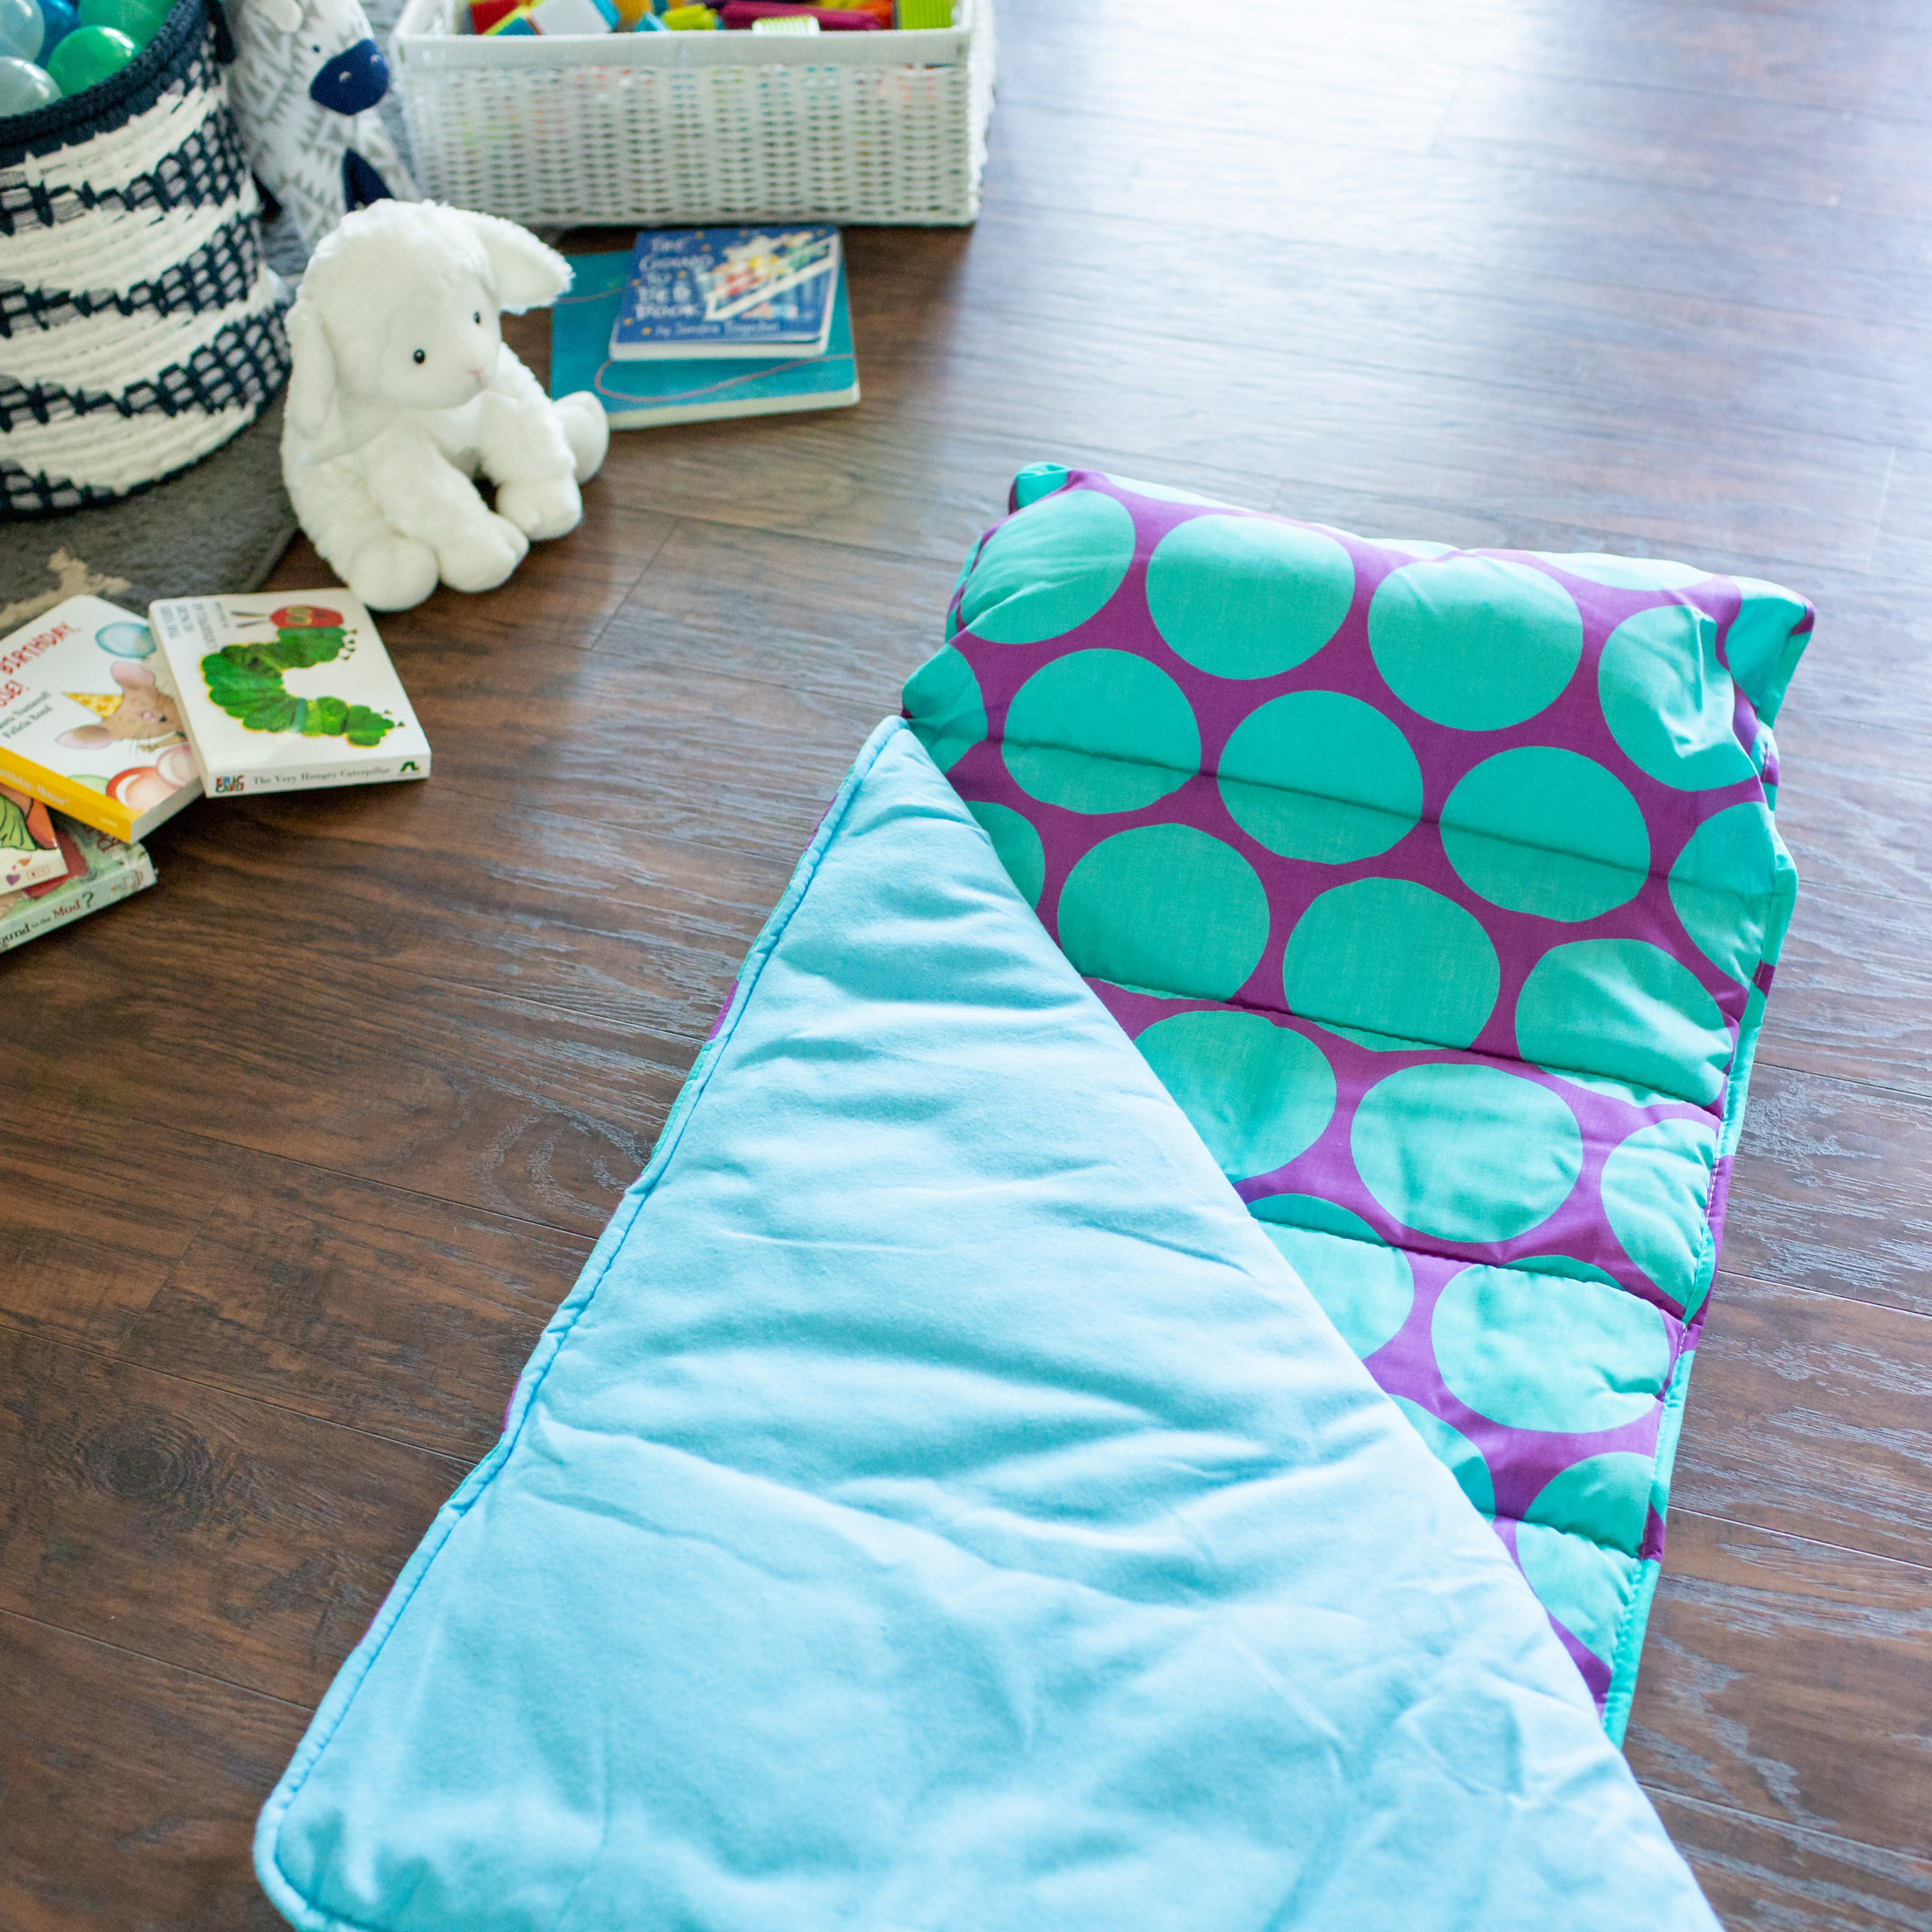 Wildkin Original Nap Mat for Toddler Boys and Girls, Ideal for Daycare and Preschool, Hypoallergenic, Phthalate and BPA Free, Roll-up Design (Big Dot Aqua) - image 3 of 7